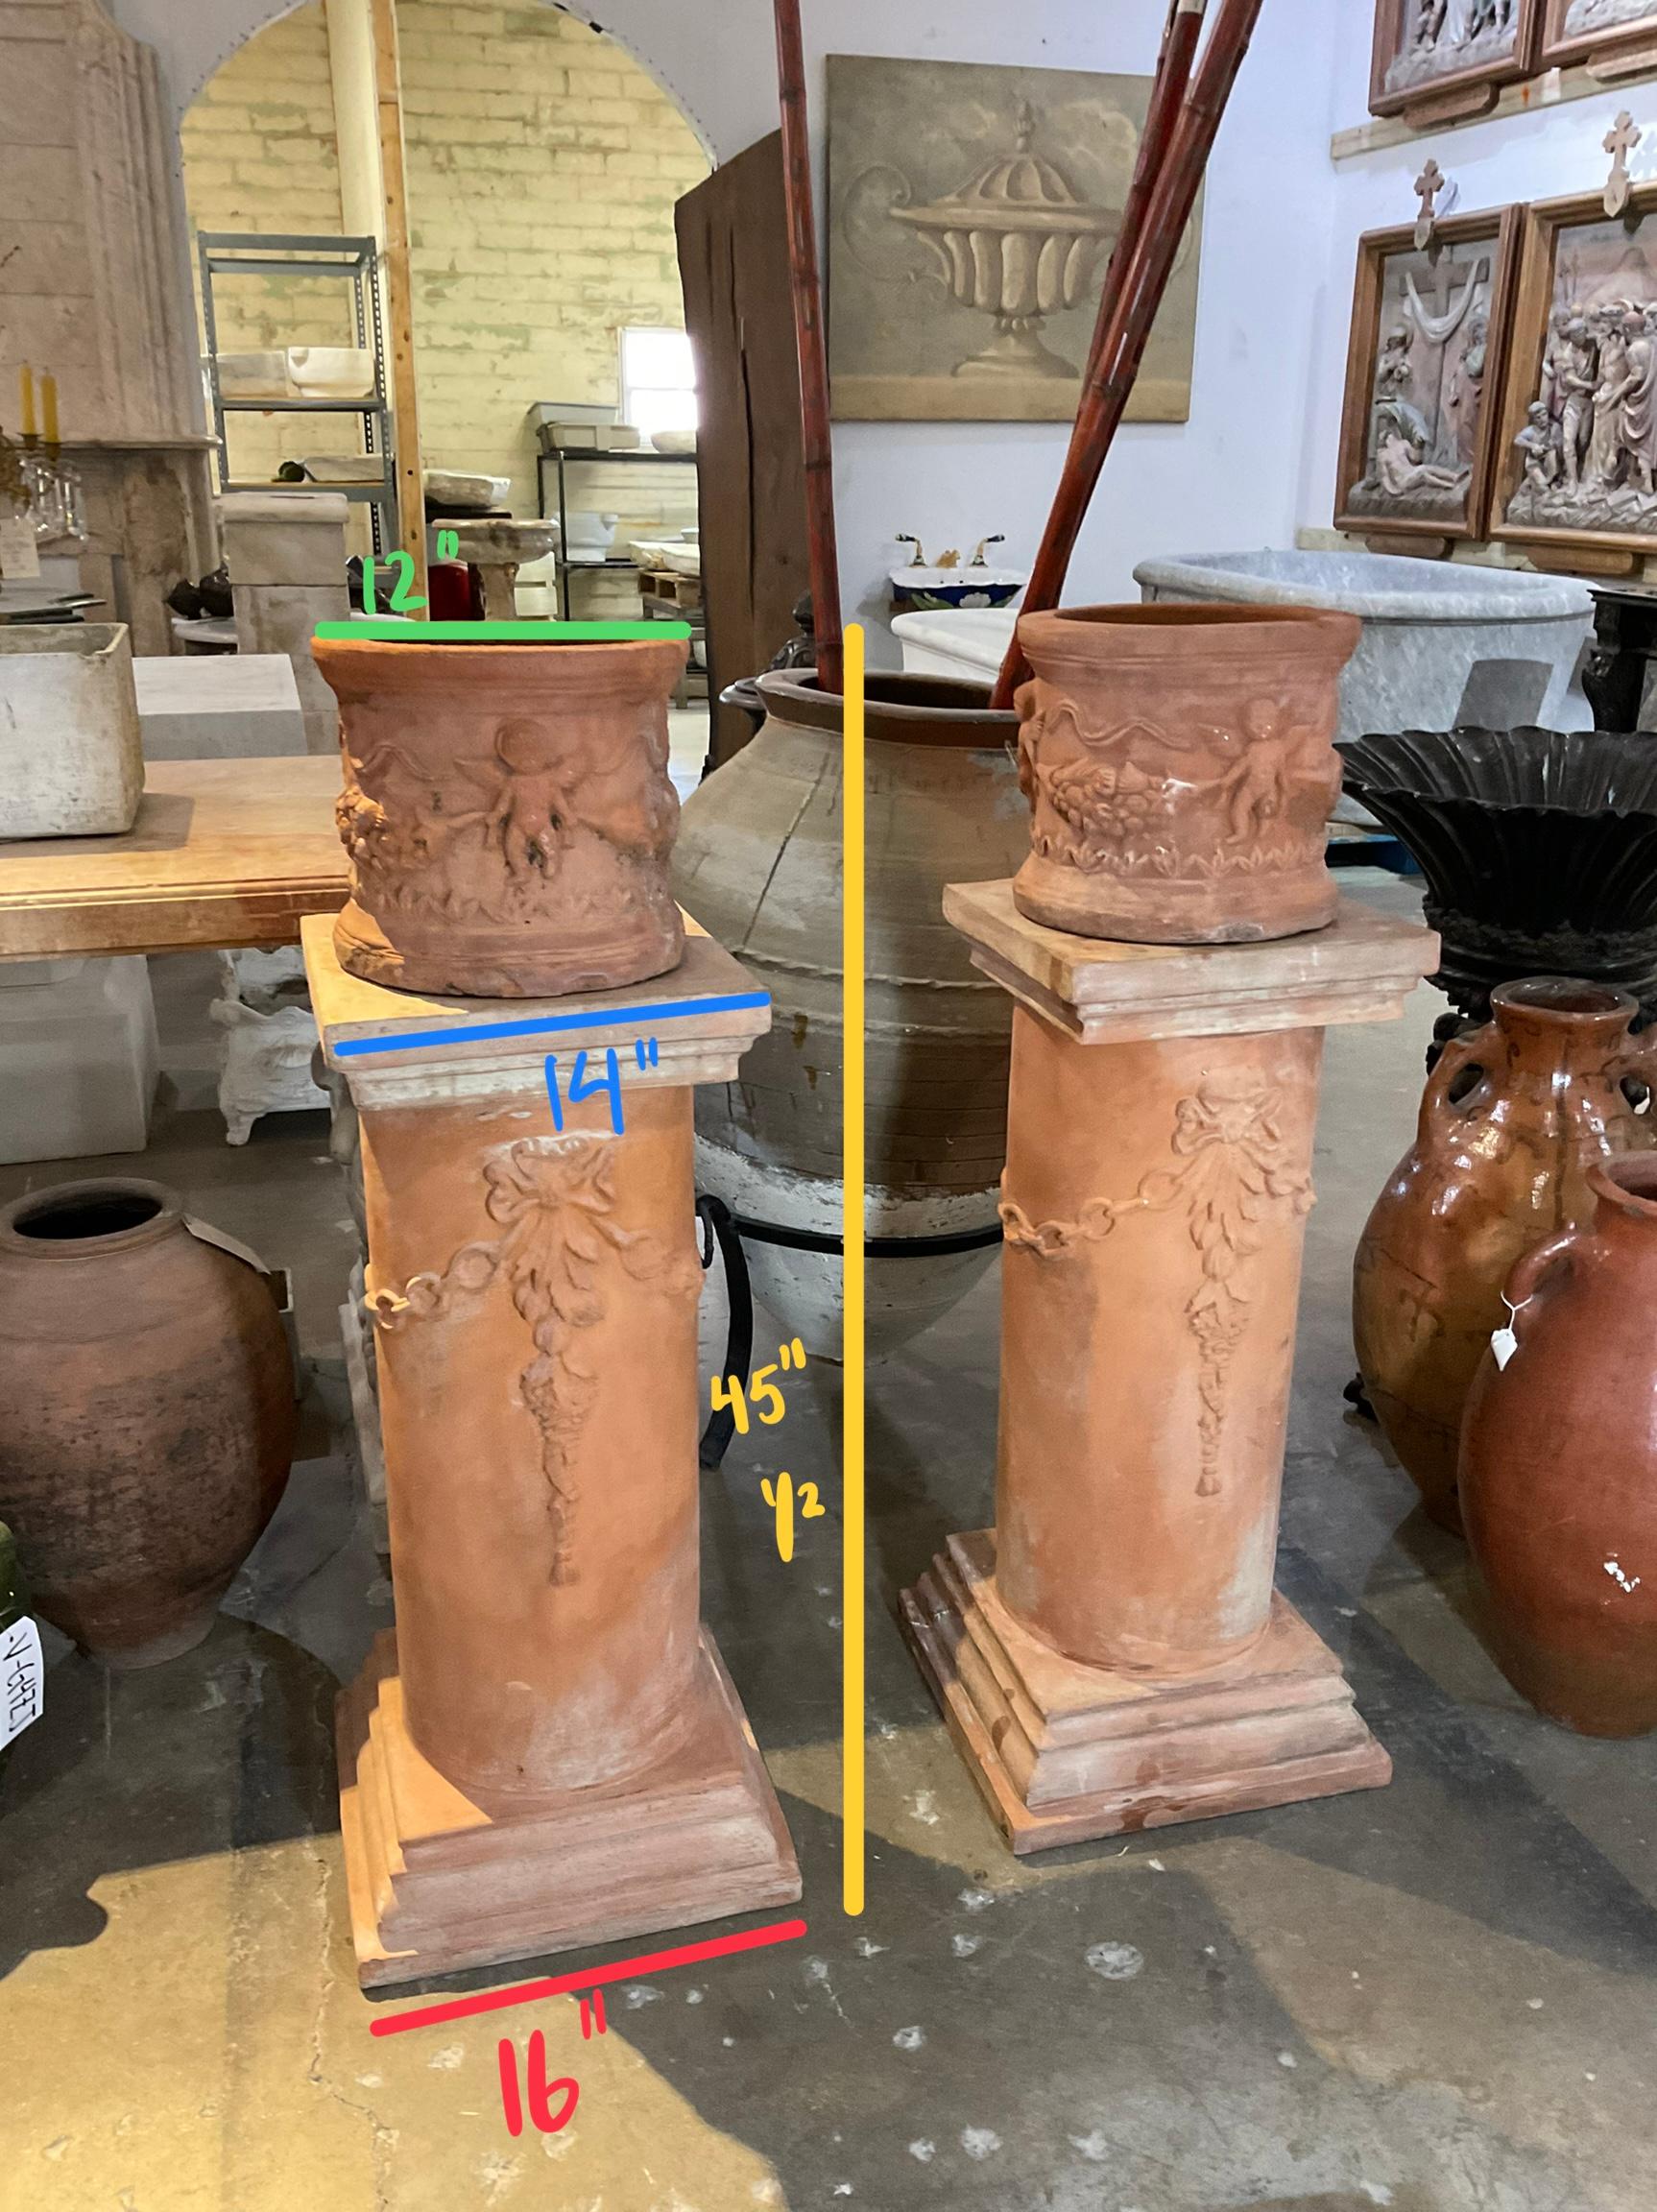 English Terracotta Planters For Sale 3